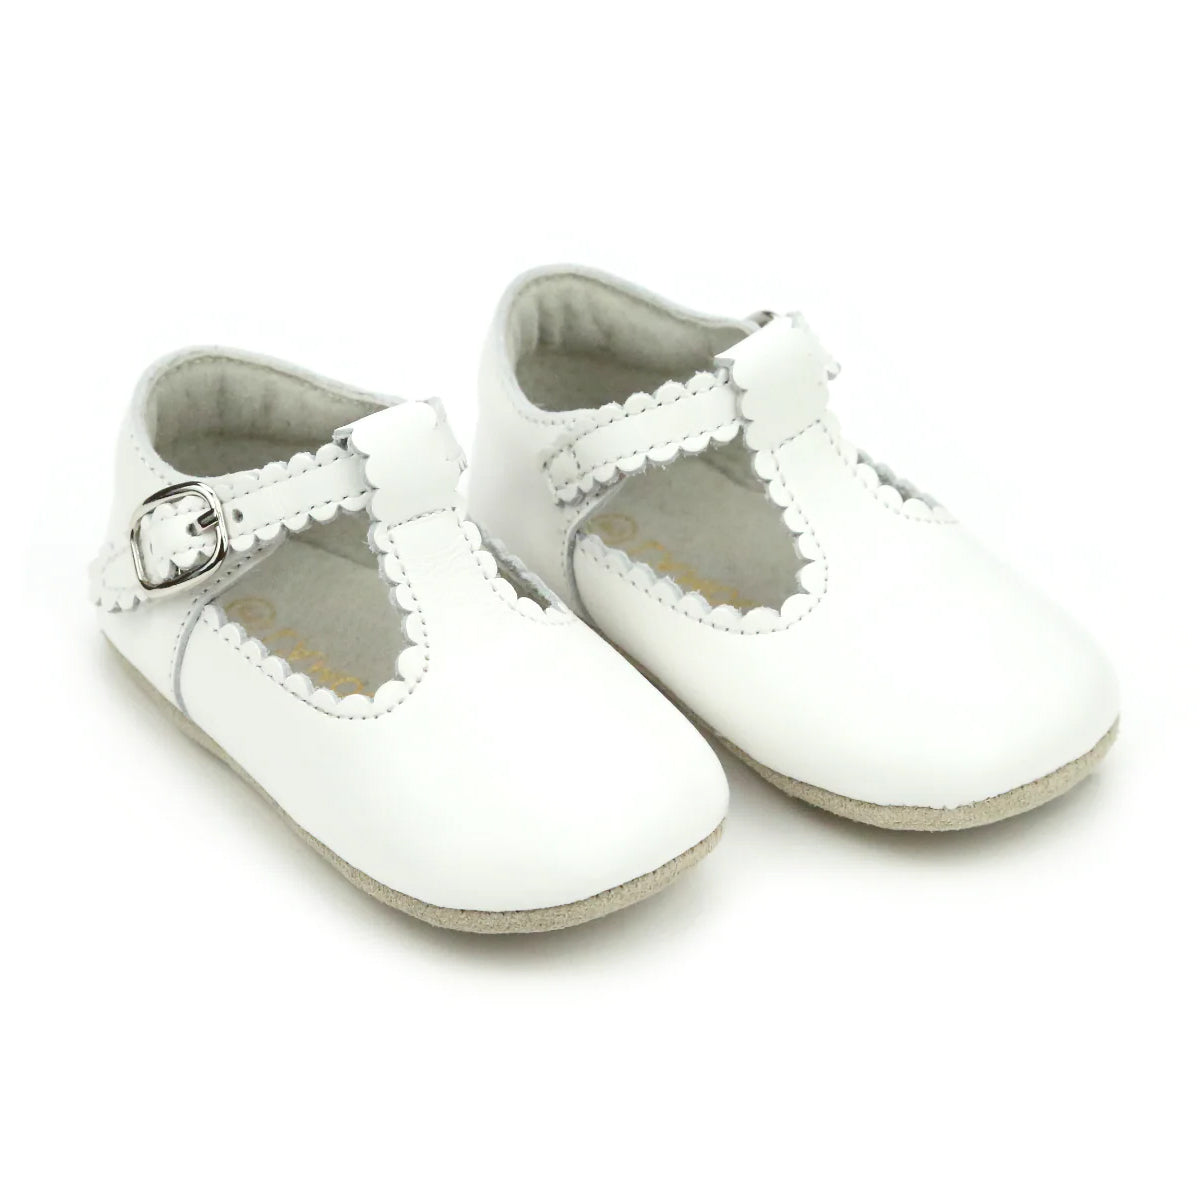 L'Amour White Elodie Baby Girl's Mary Jane Crib Shoes